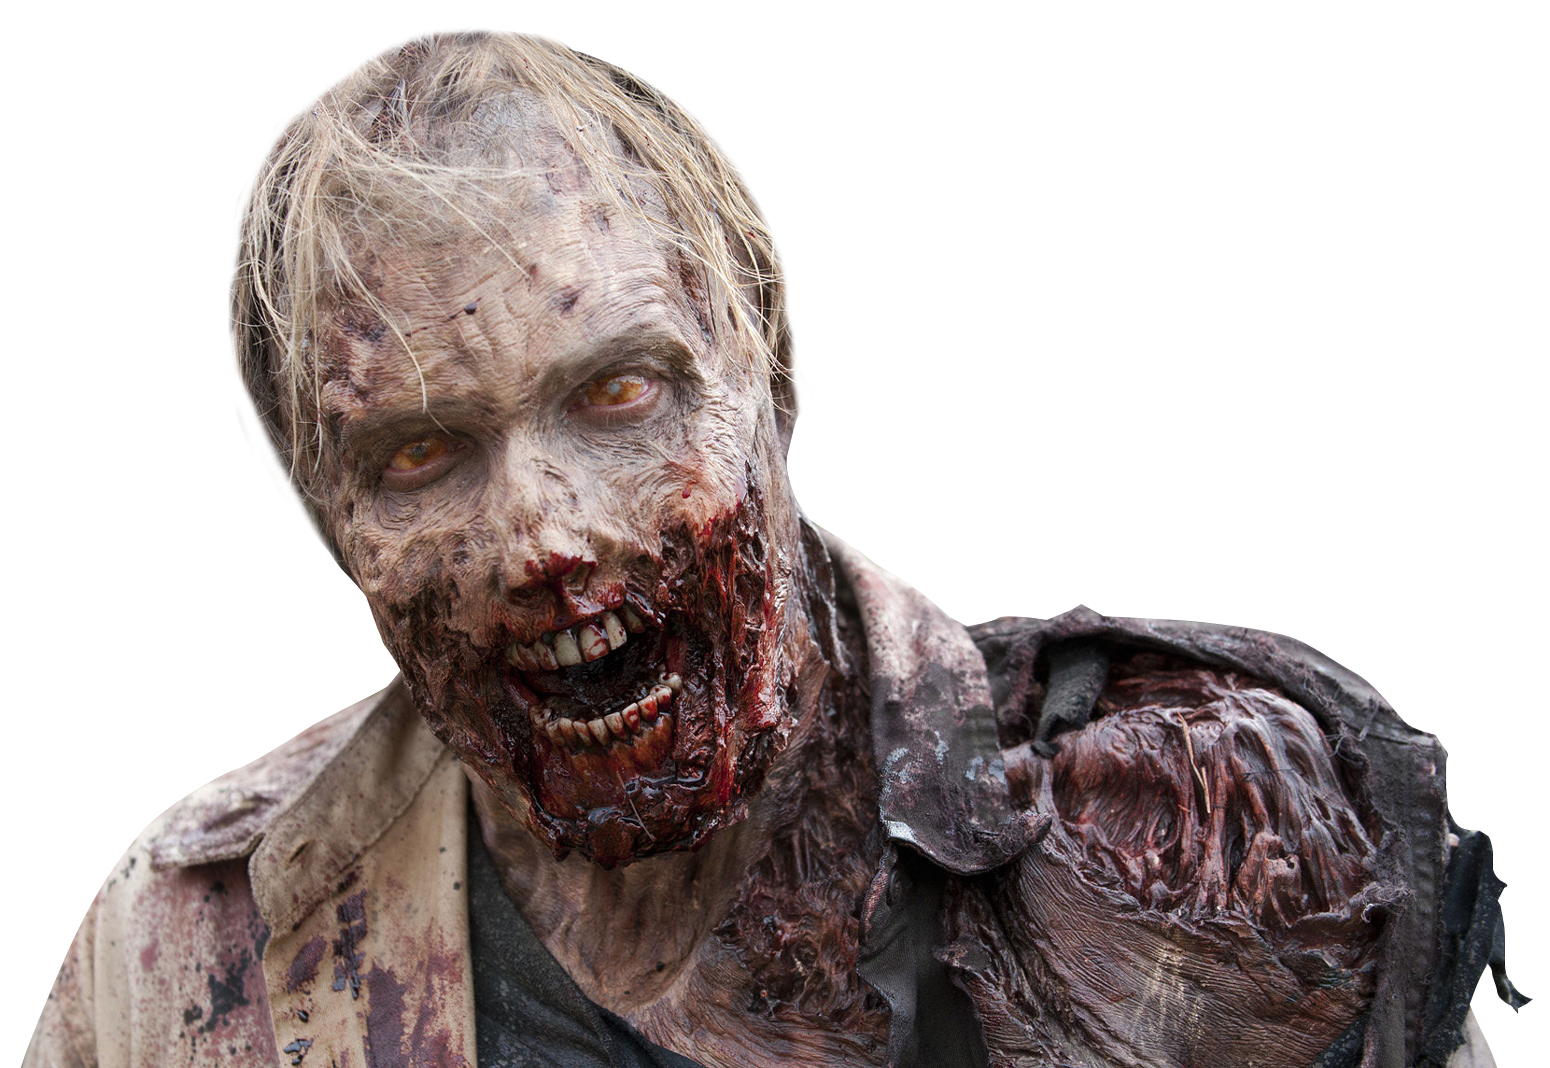 Zombie PNG Transparent Image, Zombie PNG - Free PNG